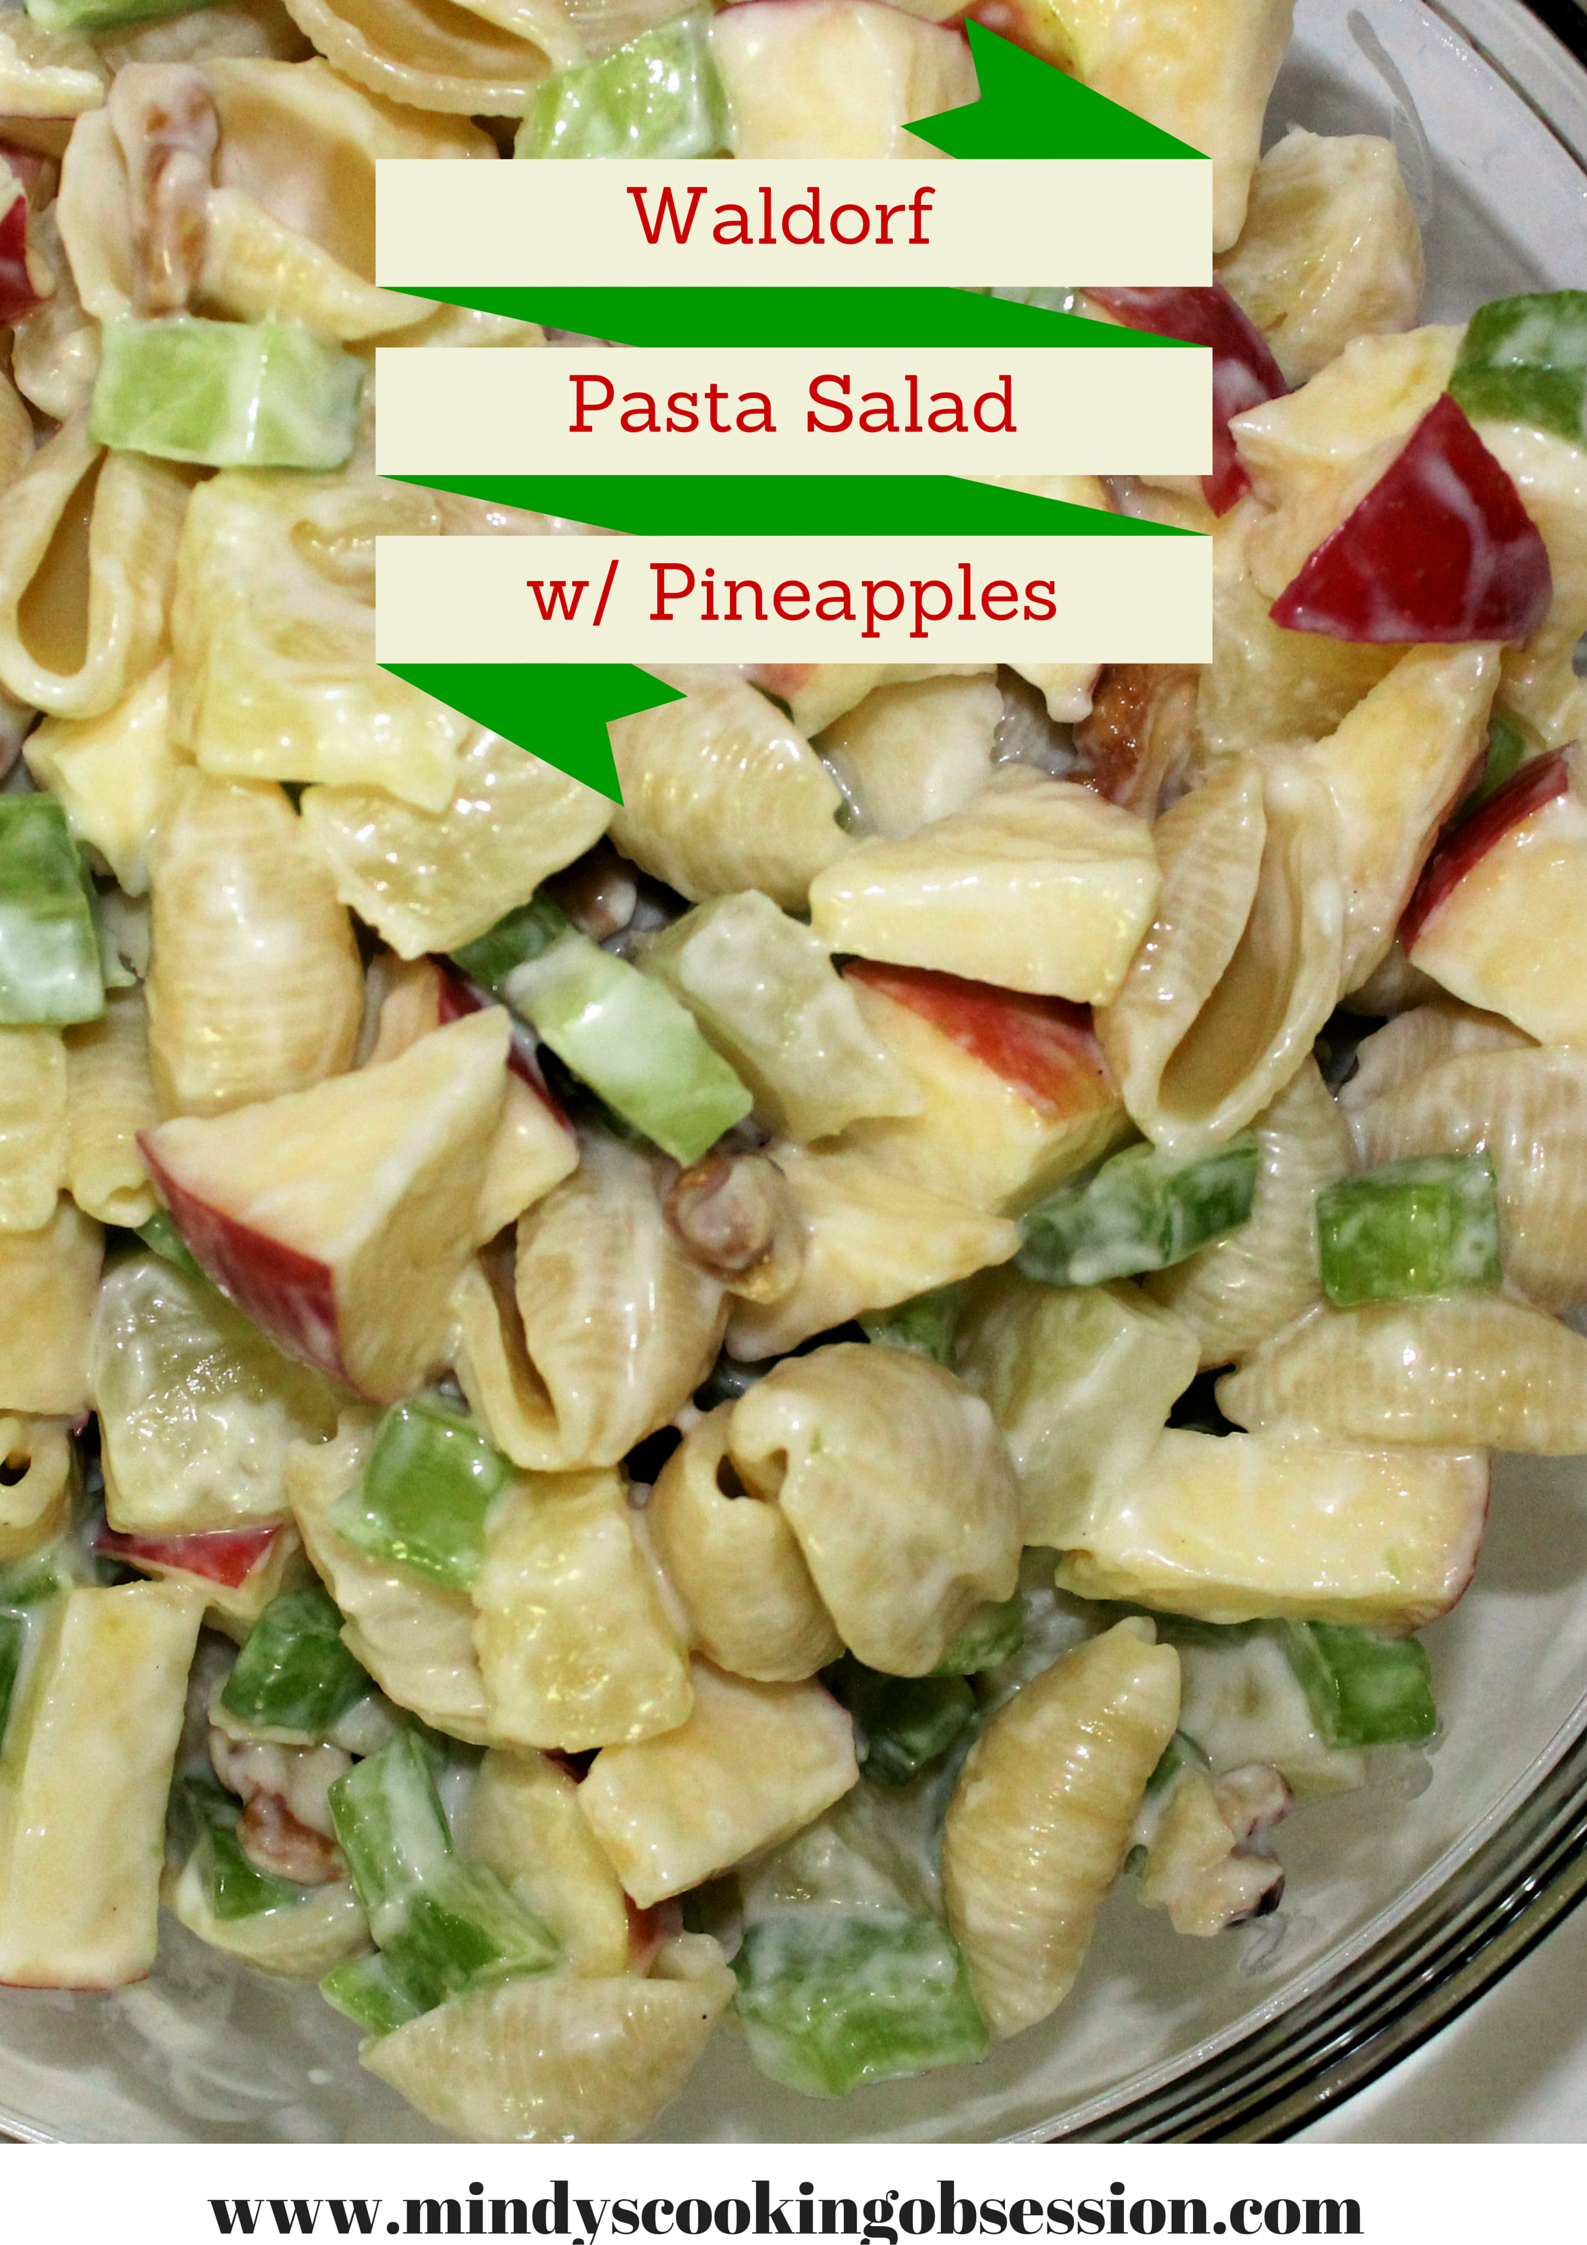 Waldorf Pasta Salad with Pineapples - Mindy's Cooking Obsession